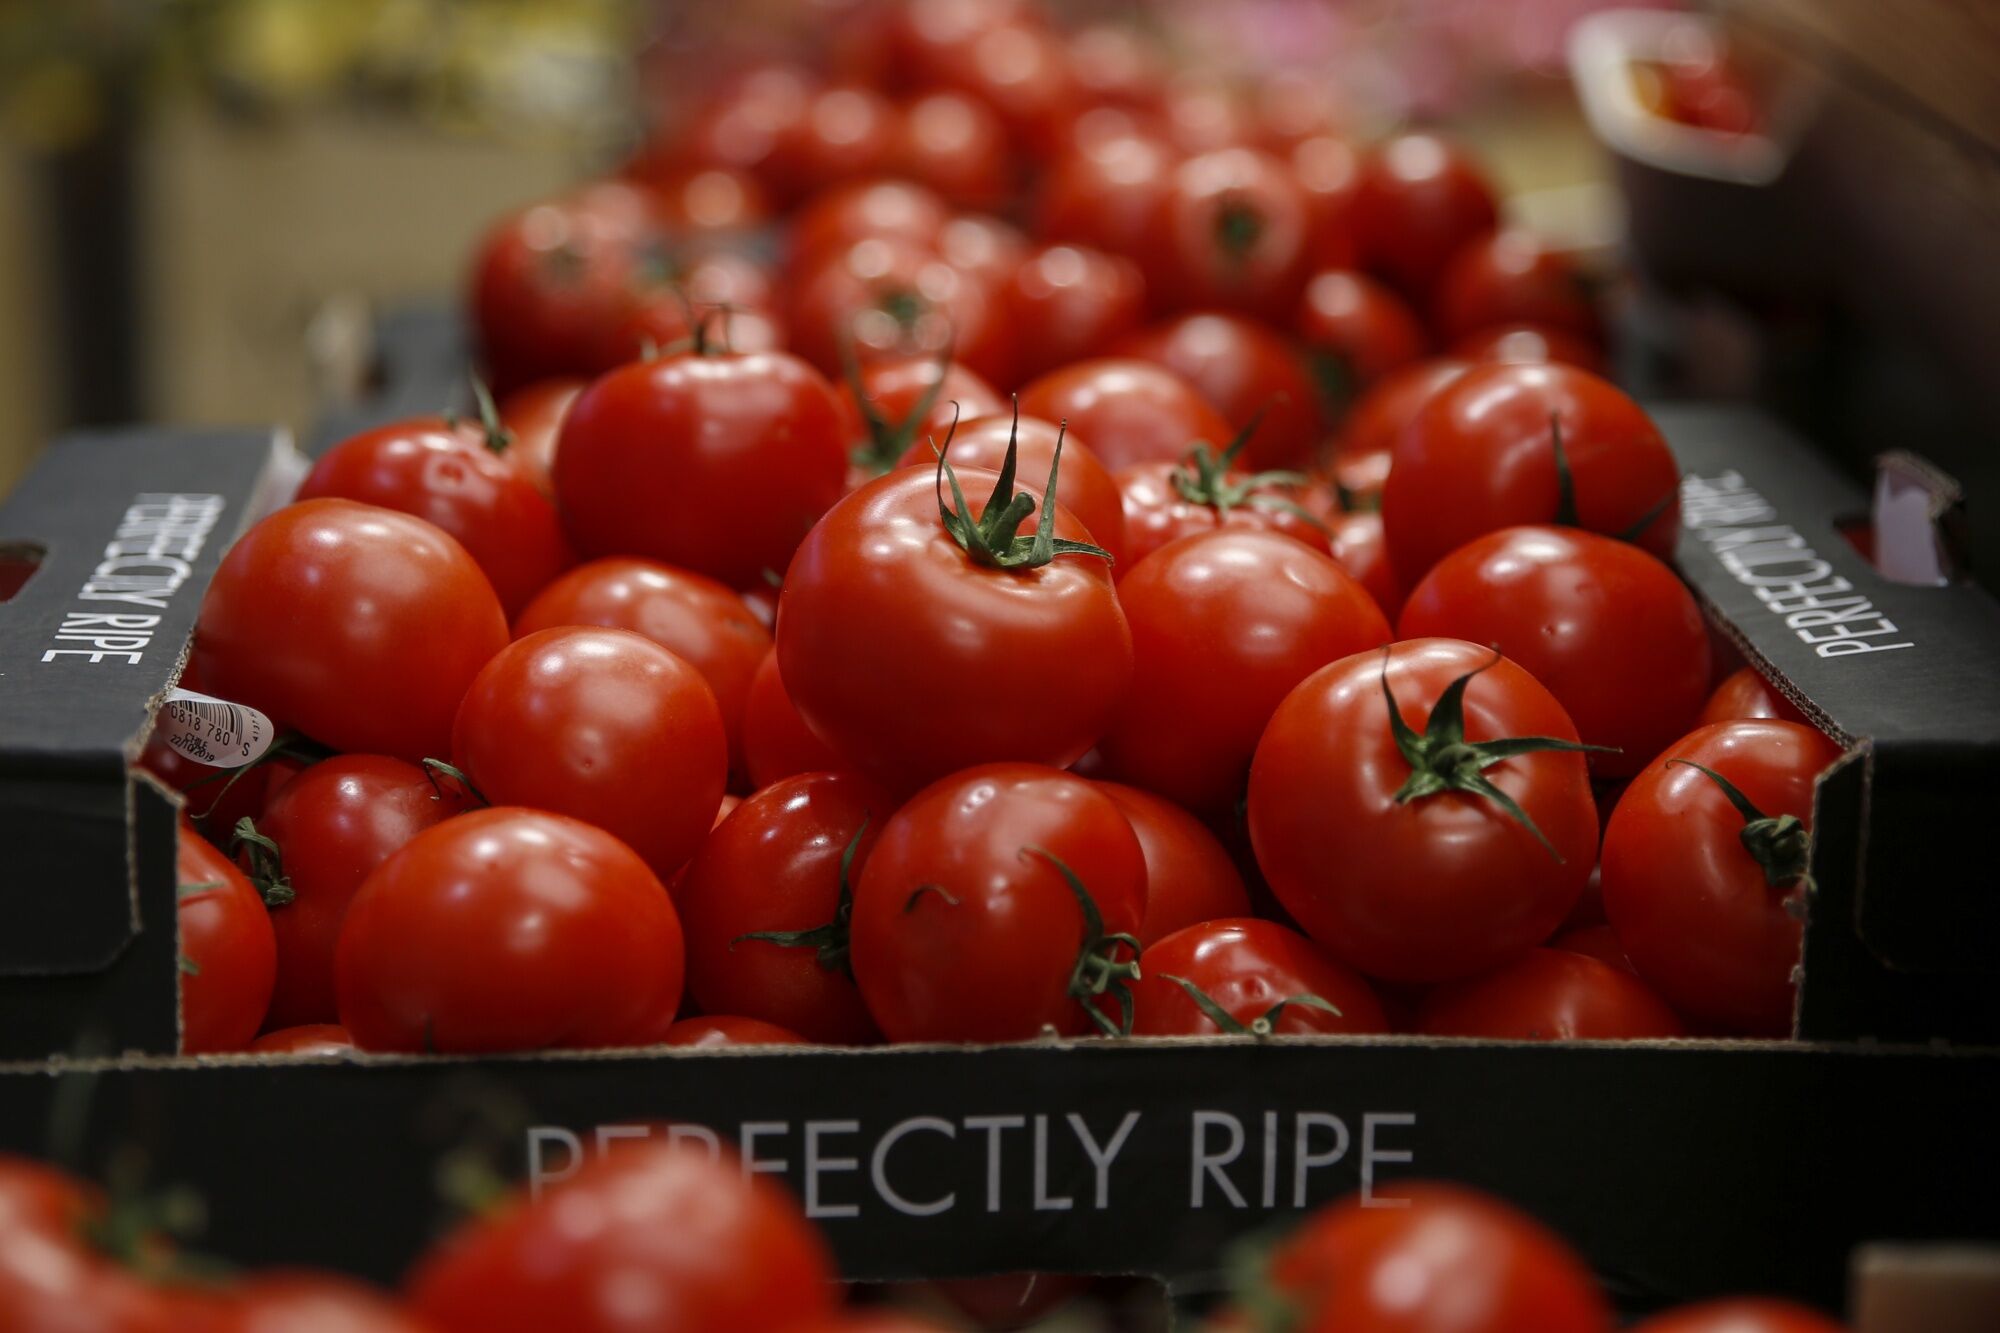 Tomato Shortage in UK Supermarkets After Bad Weather Disrupts Supplies